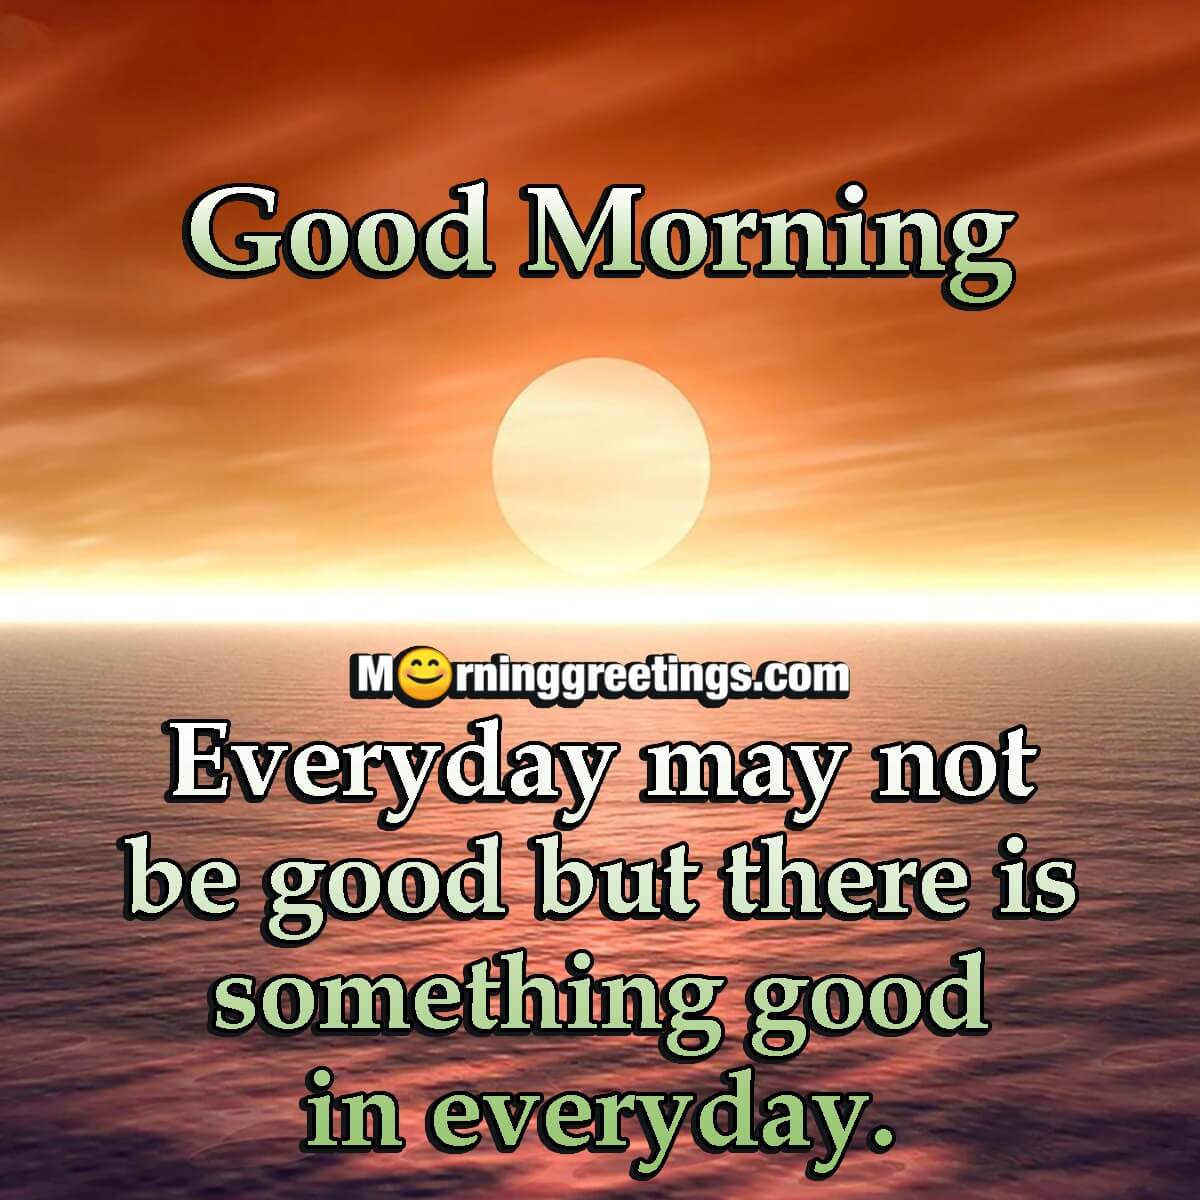 Good Morning Everyday May Not Be Good